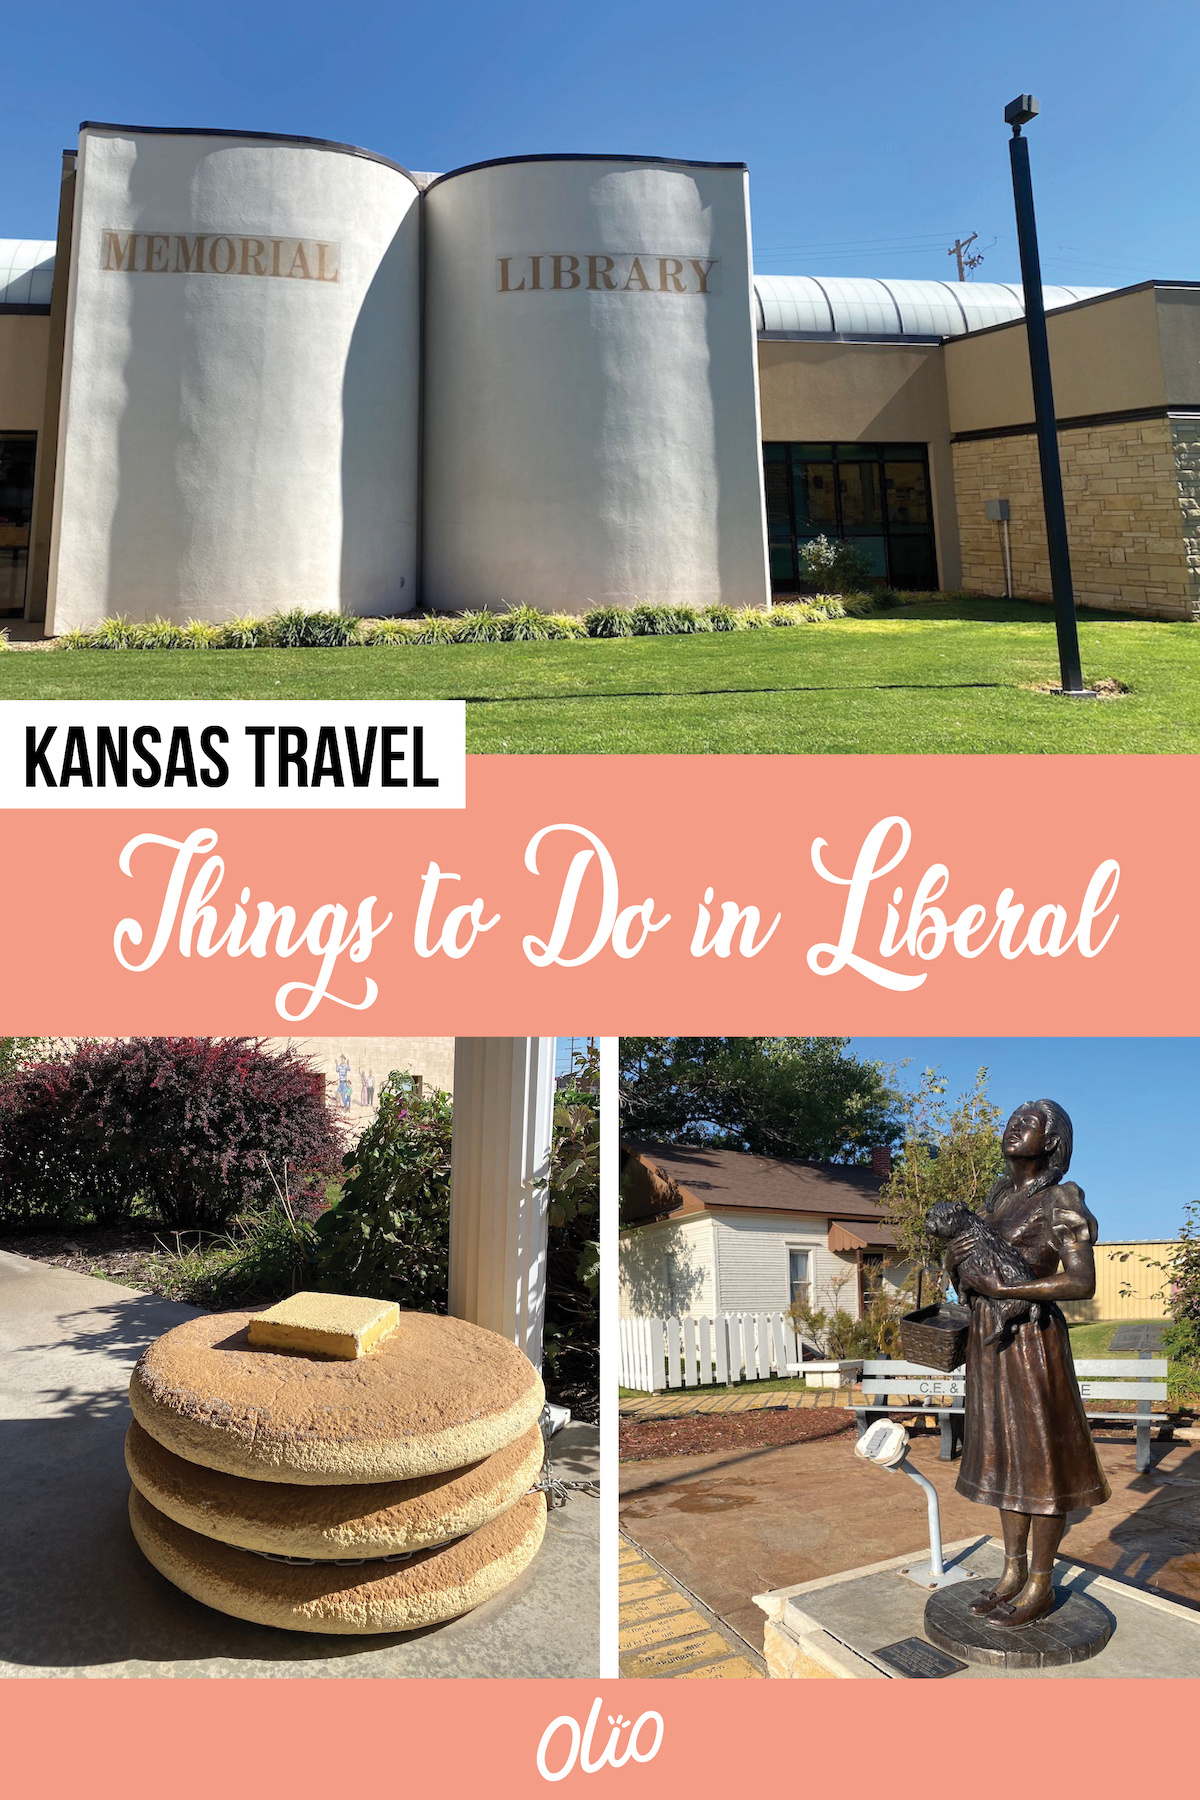 There's no place like Liberal, Kansas! This small southwestern Kansas community is most well-known as the official hometown of the Wizard of Oz's Dorothy Gale. But there are lots of other things to see in this community! Learn about local history, take part in unique traditions and eat some seriously delicious tacos.